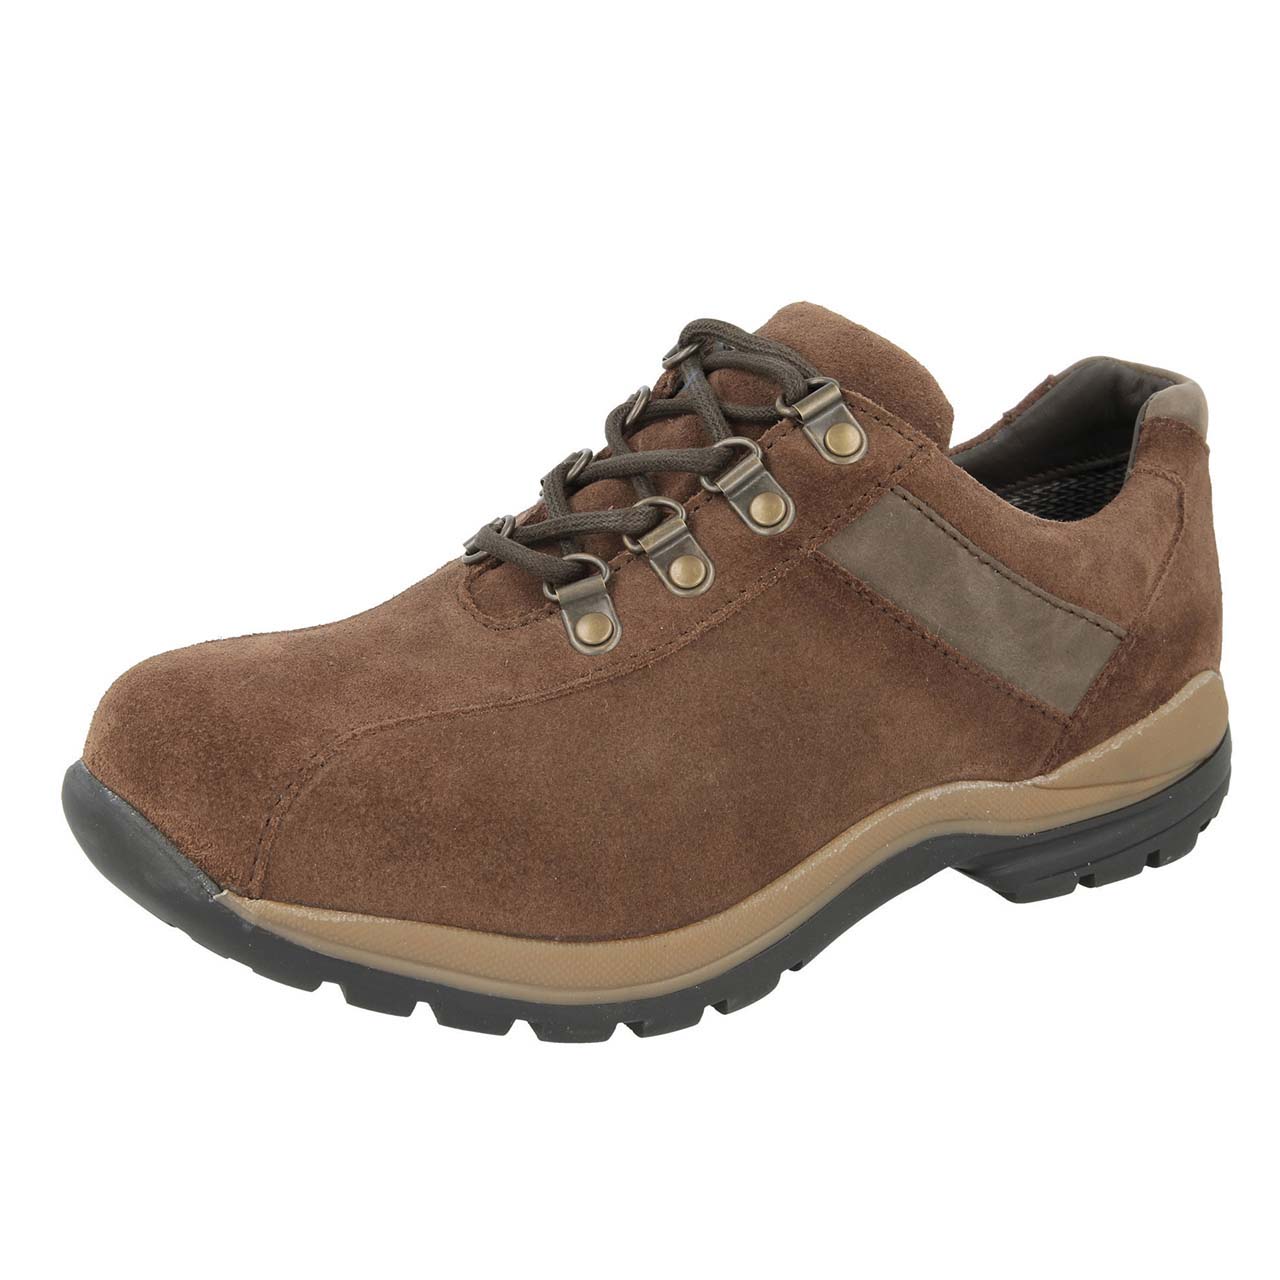 Extra Wide Unisex Suede Walking Shoes - Brown